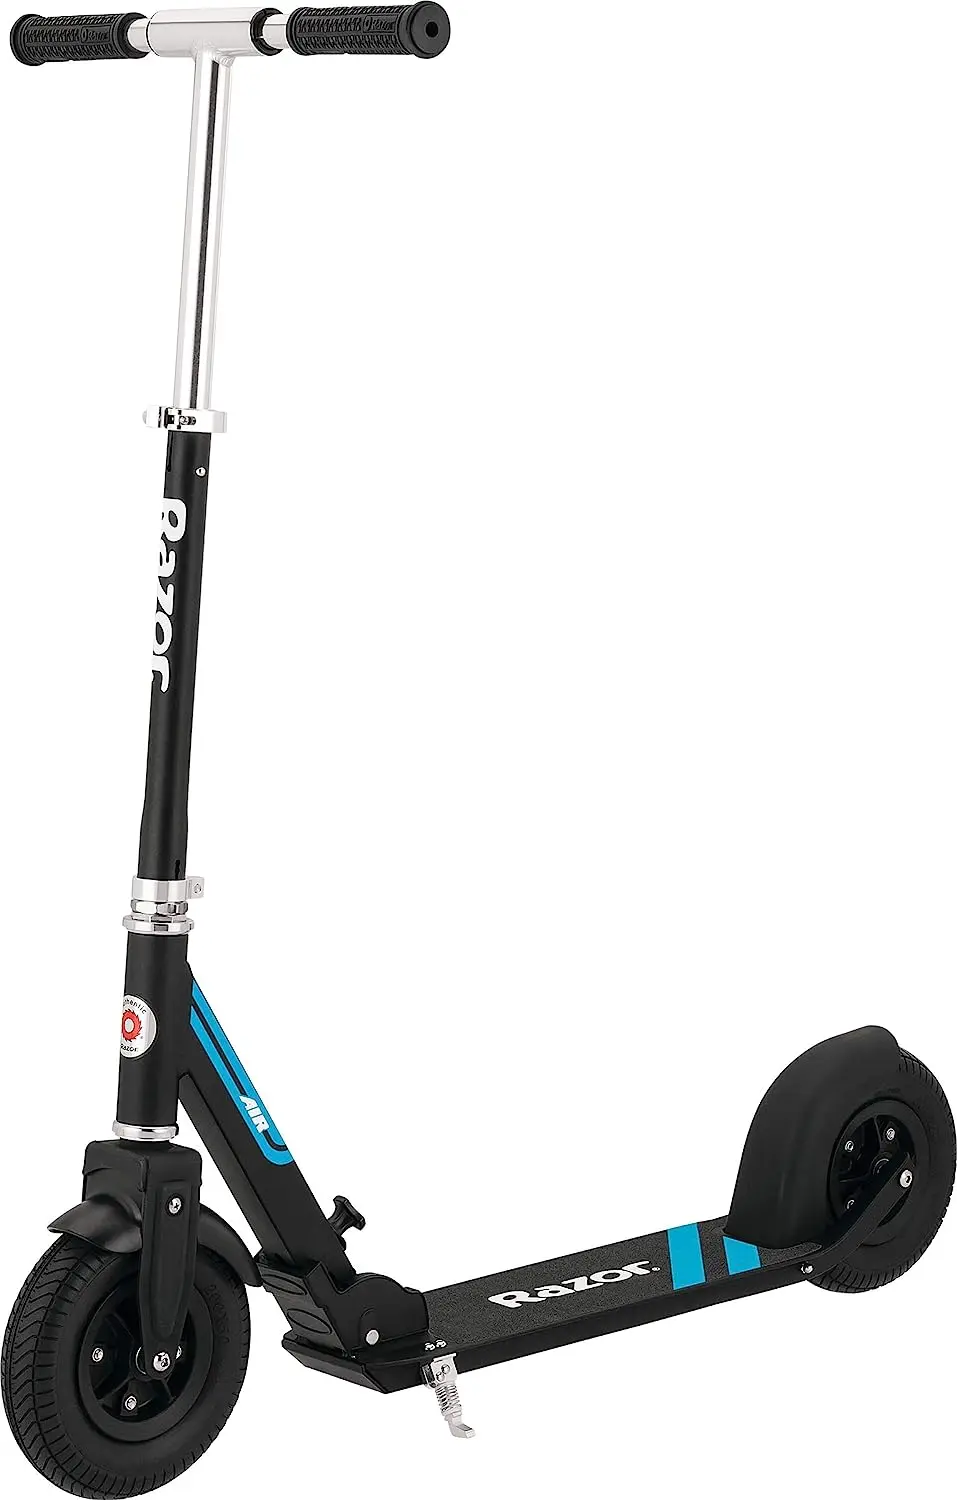 

Air Kick Scooter for Kids Ages 8+ - Extra-Long Deck, 8" Pneumatic Rubber Wheels, Foldable, Anti-Rattle Handlebars, For Rider